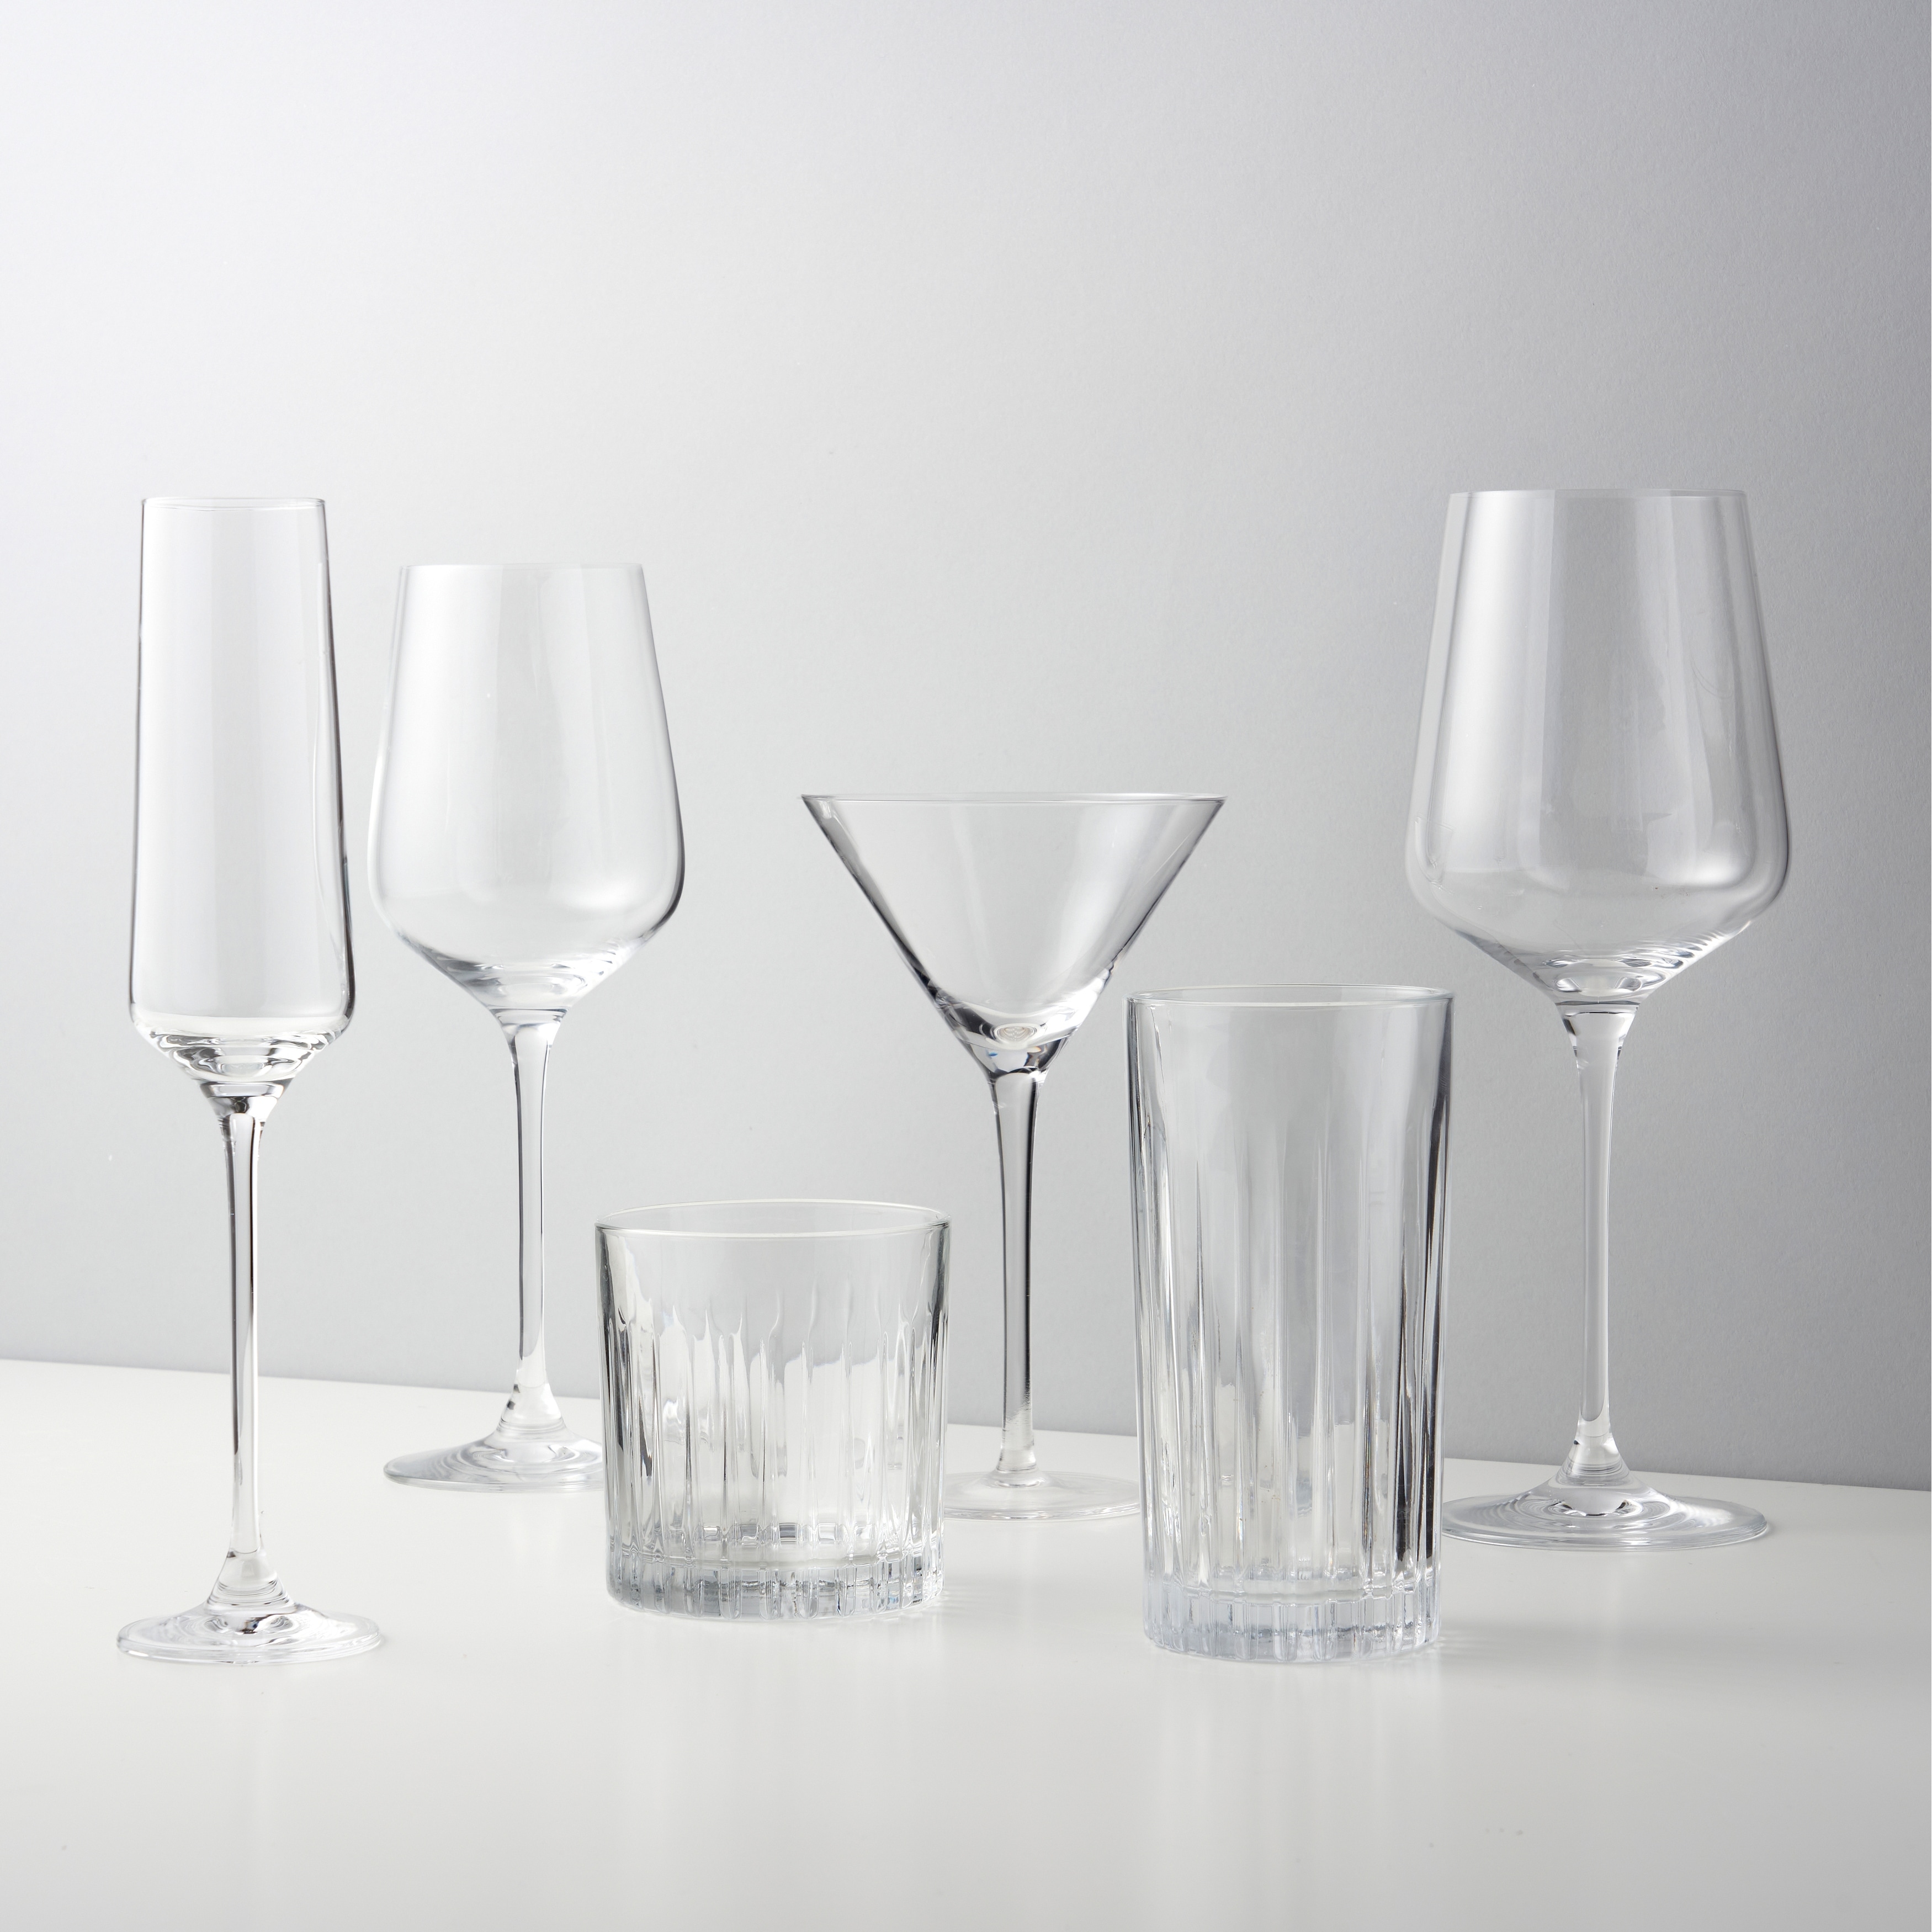 https://ak1.ostkcdn.com/images/products/is/images/direct/11c6ed2f708d9a5d326b970a3e85617cd21e705d/Viski-Stemmed-Martini-Glasses%2C-4-Lead-Free-Crystal-Stemmed-Cocktail-Glasses%2C-European-Made-Glassware%2C-Set-of-4%2C-7-Ounces.jpg